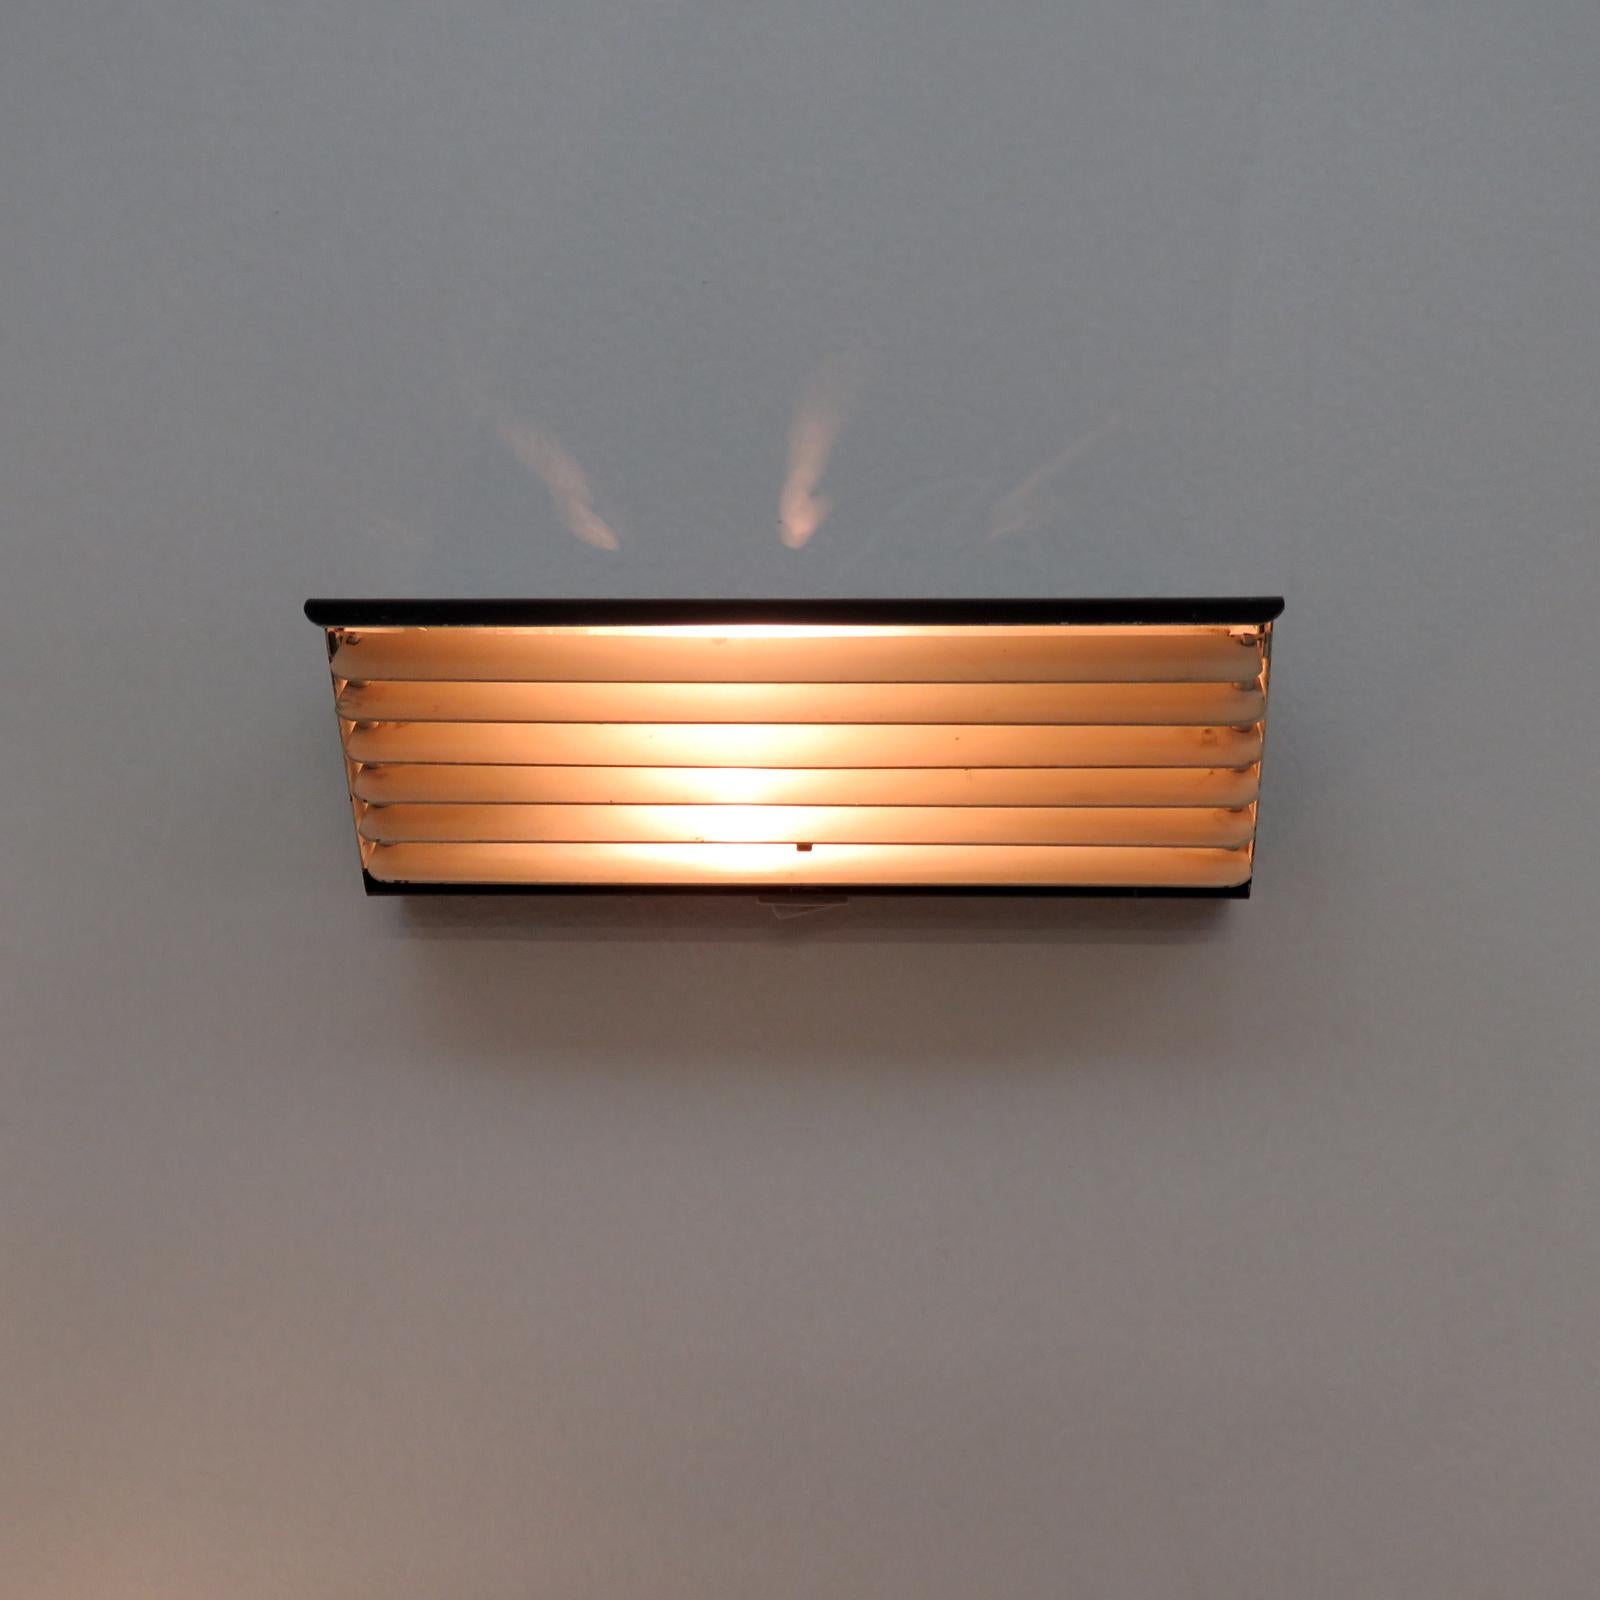 Metal Jacques Biny for Luminalite Edition Model '212' Wall Lights